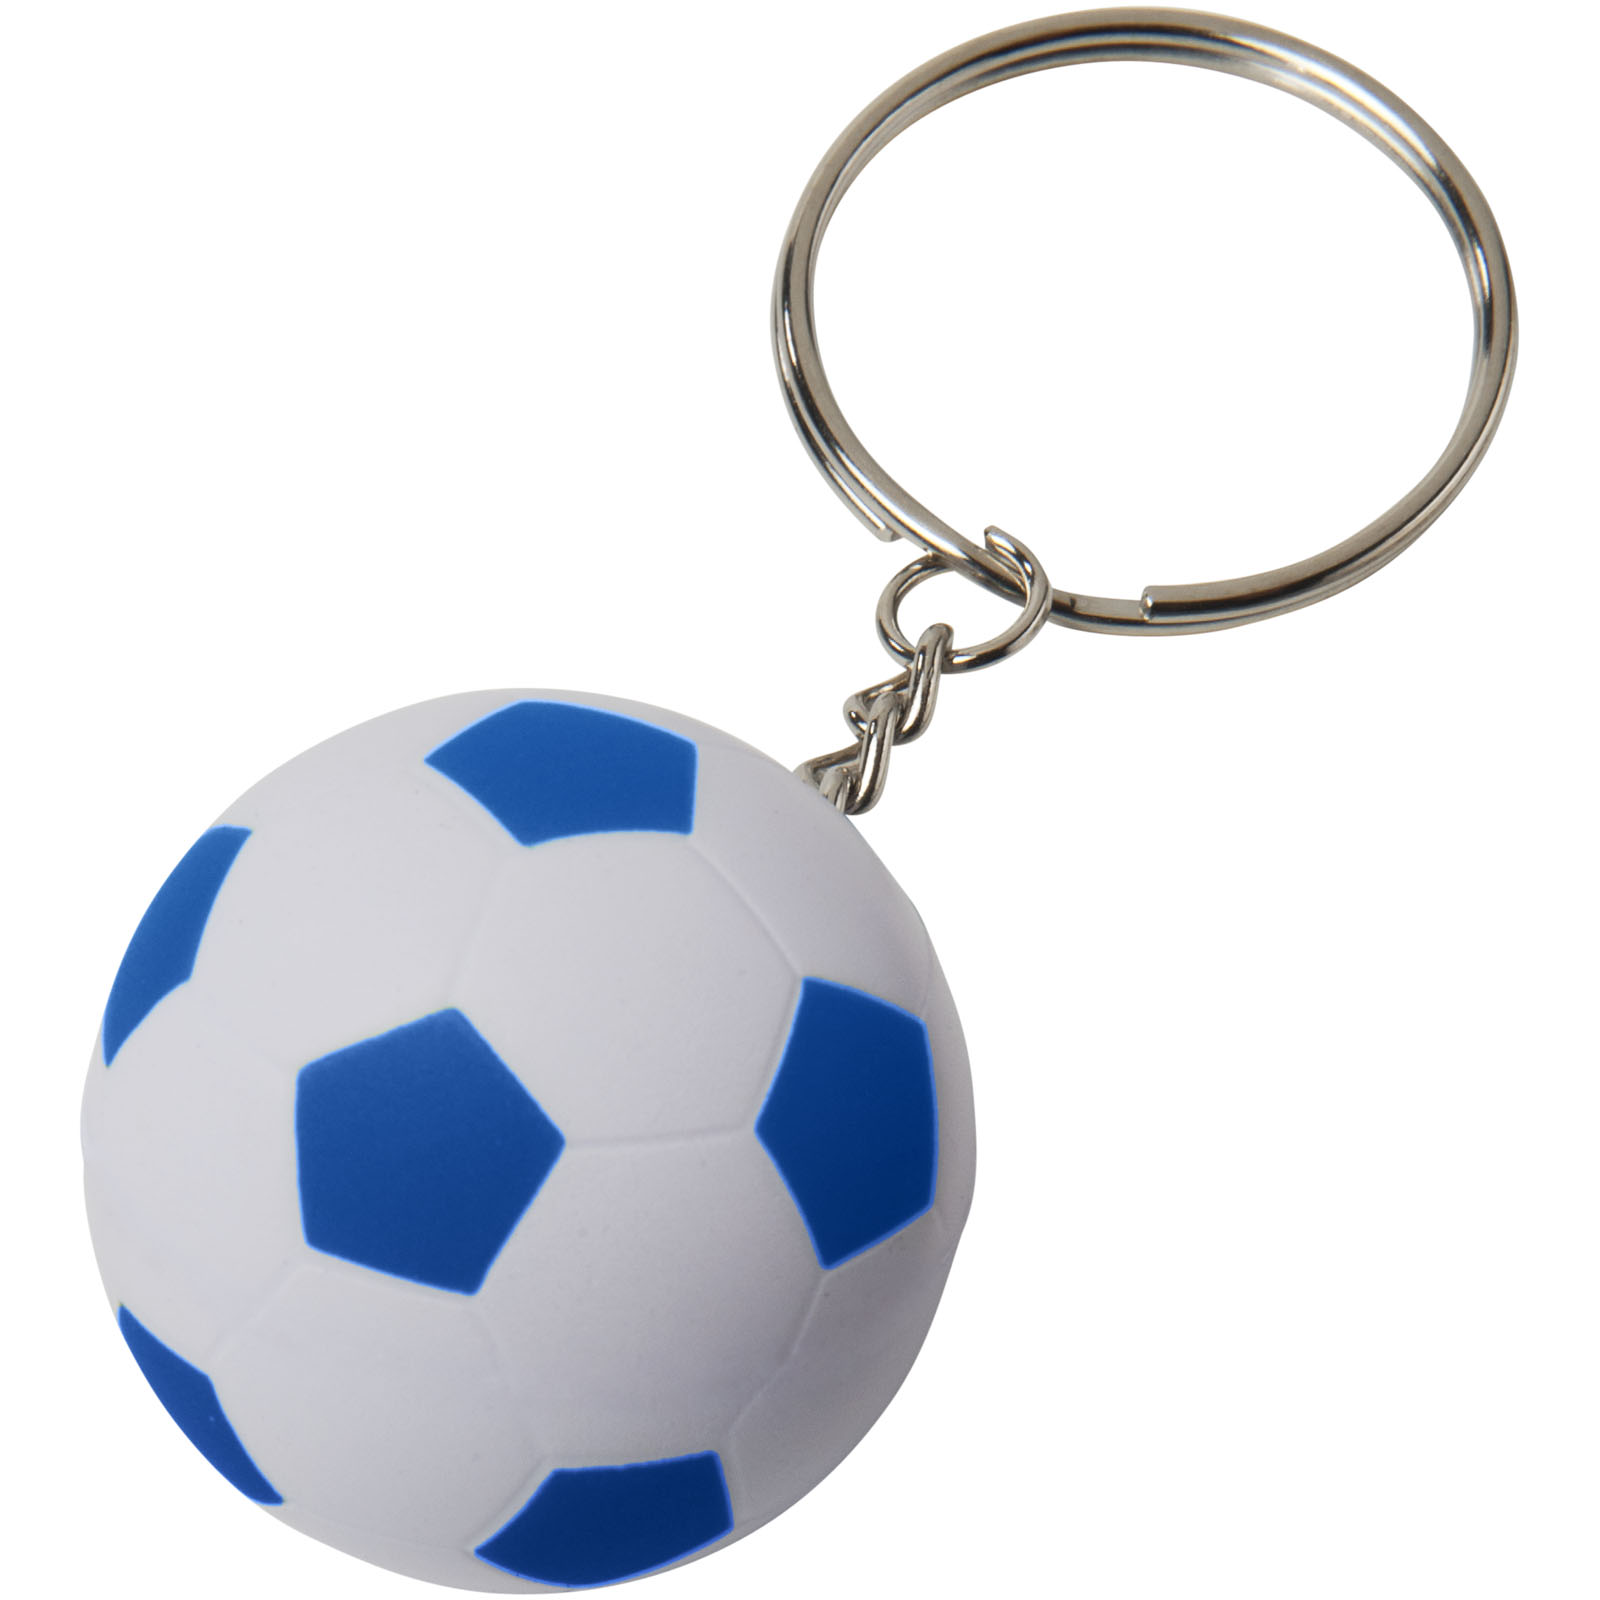 A key chain in the shape of a football that also functions as a stress reliever. - Prittlewell